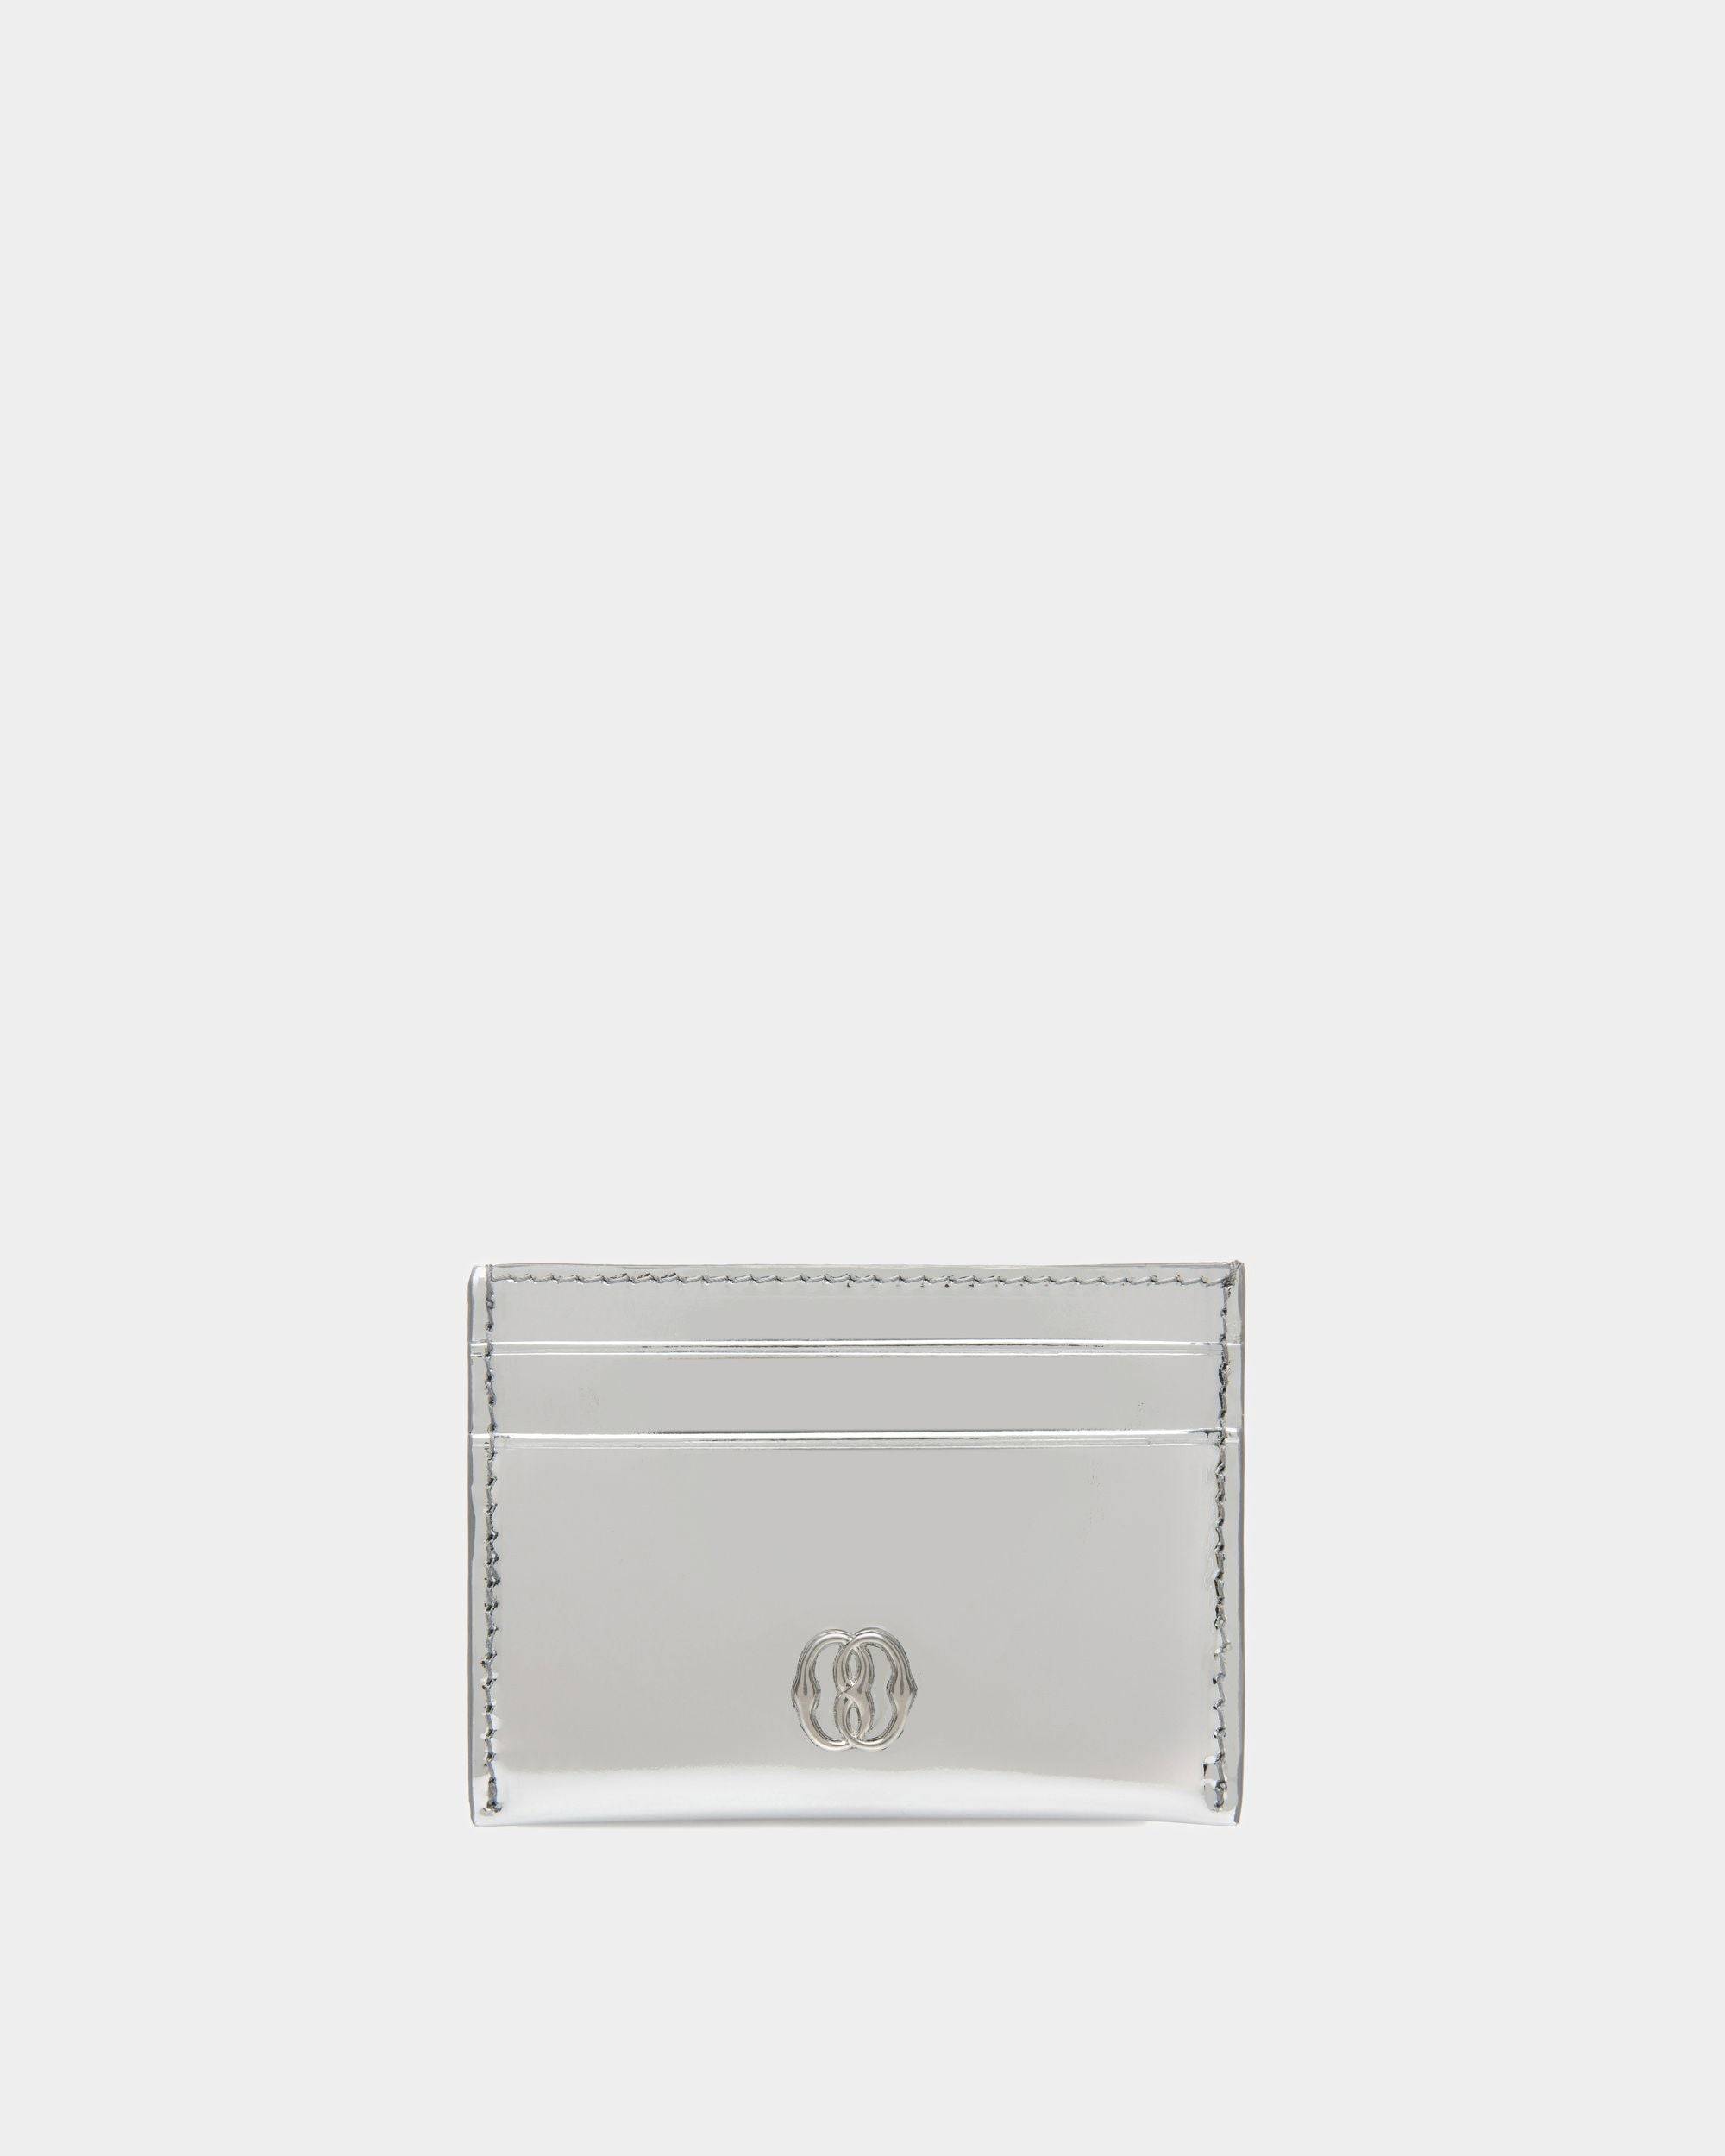 Women's Emblem Business Card Holder In Silver Leather | Bally | Still Life Front